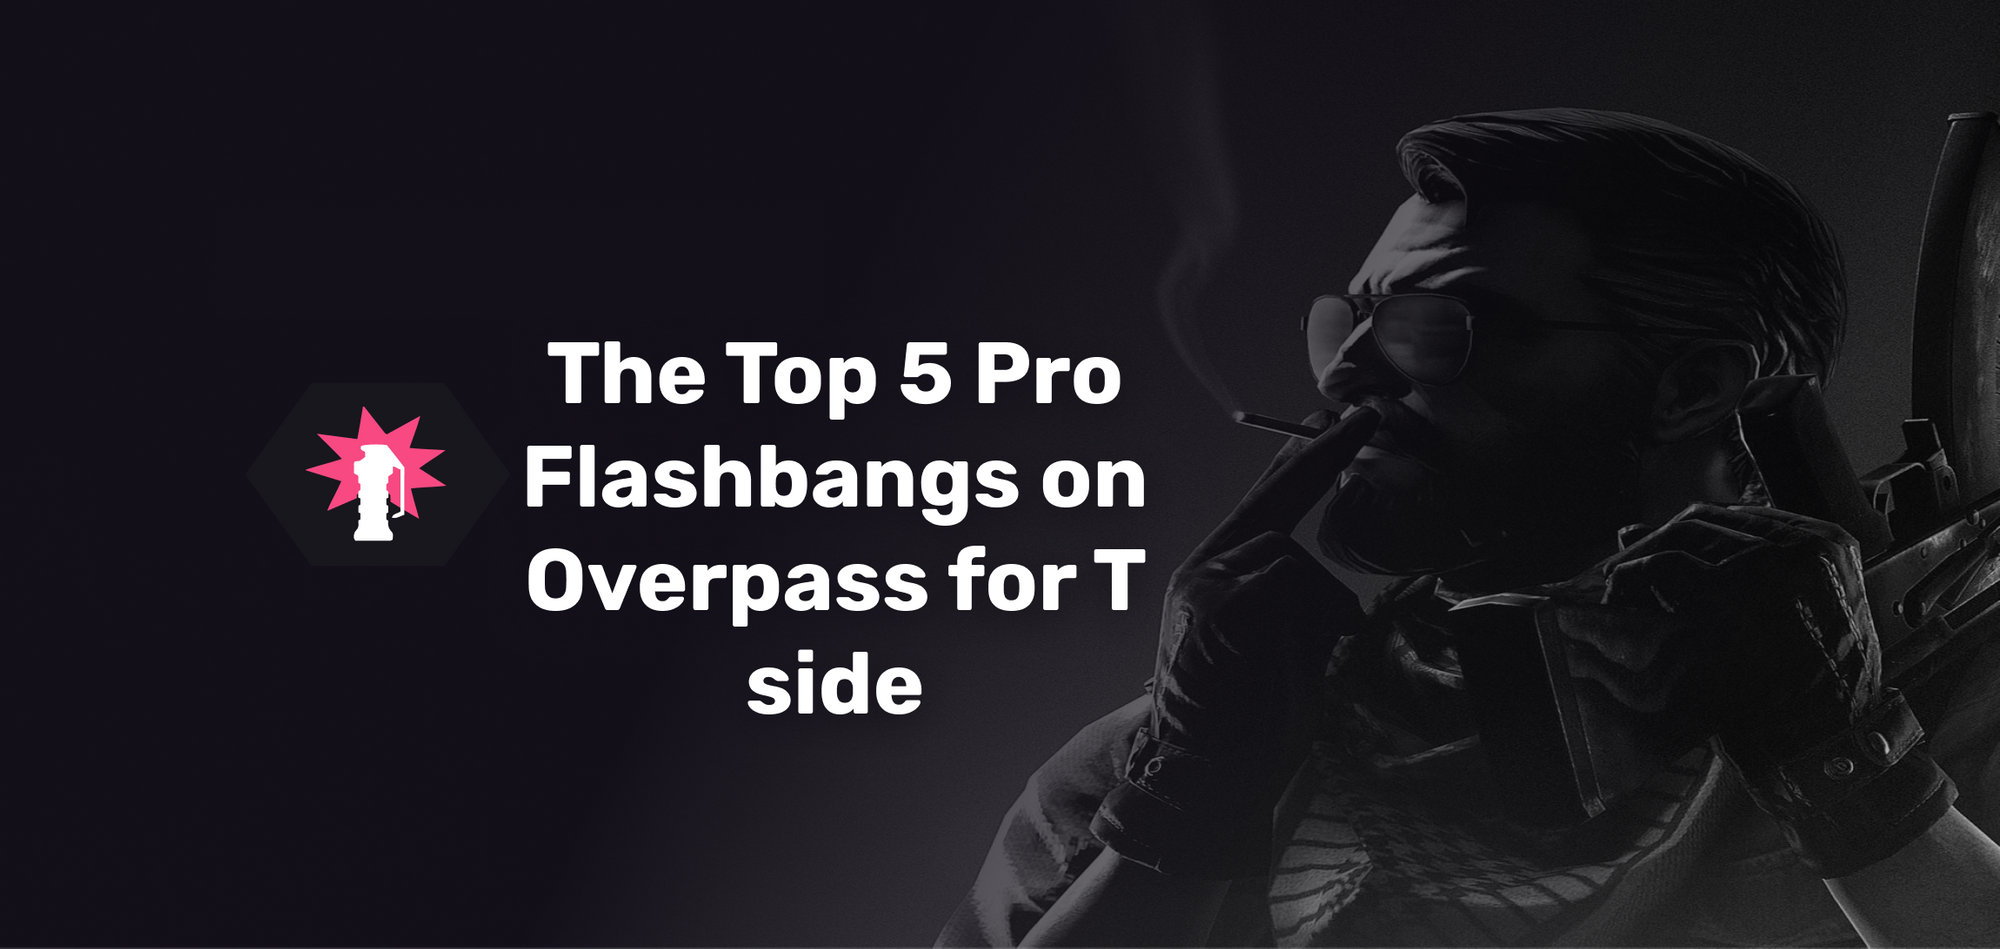 The Top 5 Pro Flashes on Overpass for T side.